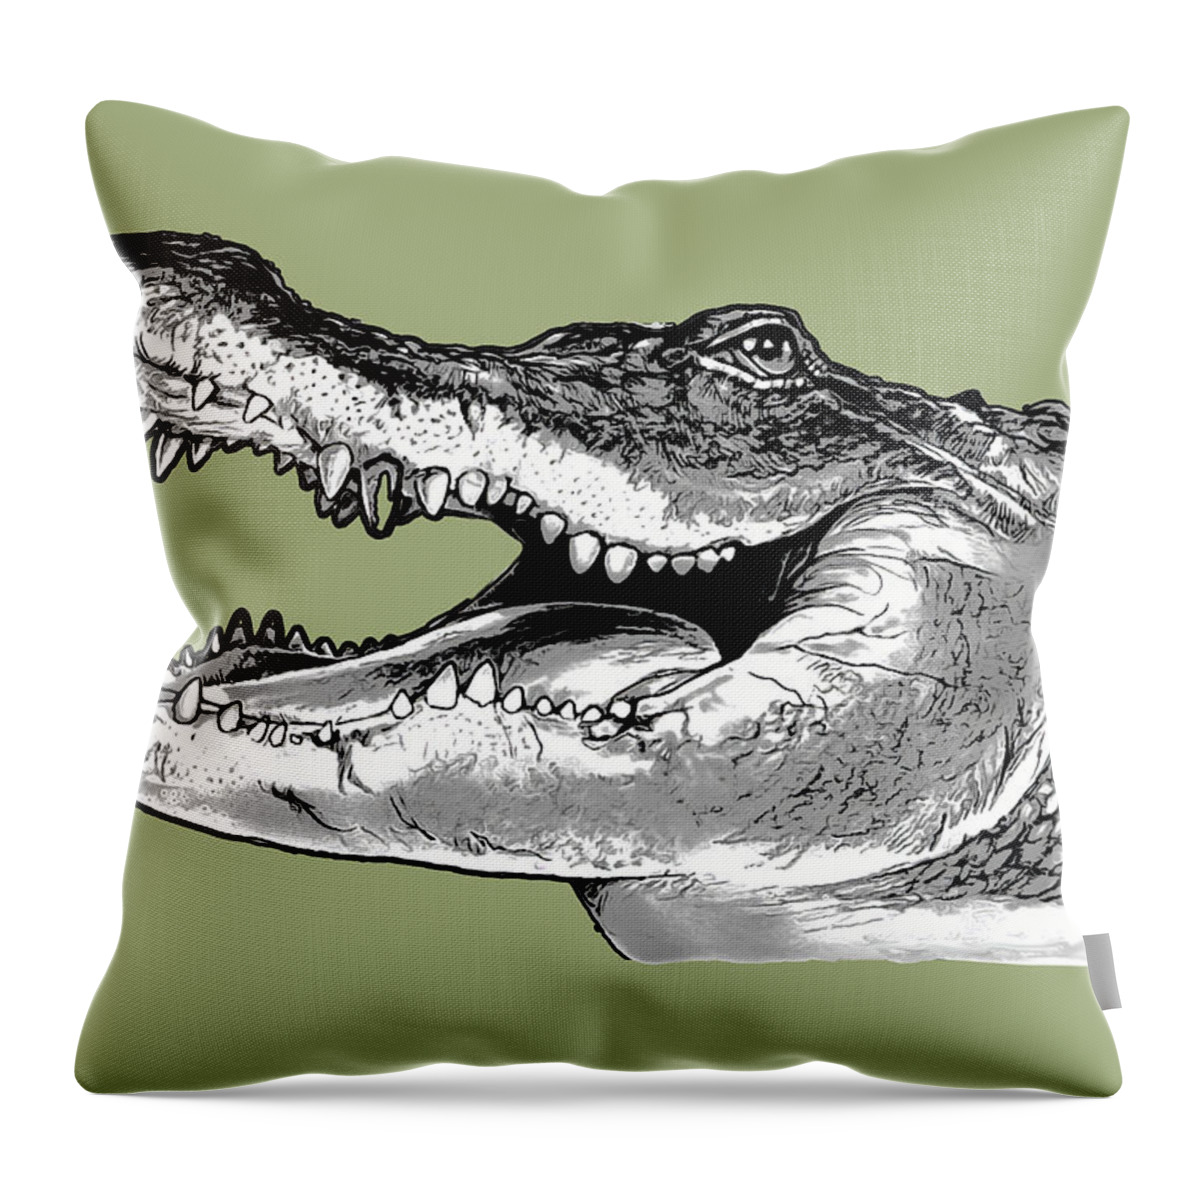 American Throw Pillow featuring the drawing American Alligator #1 by Greg Joens